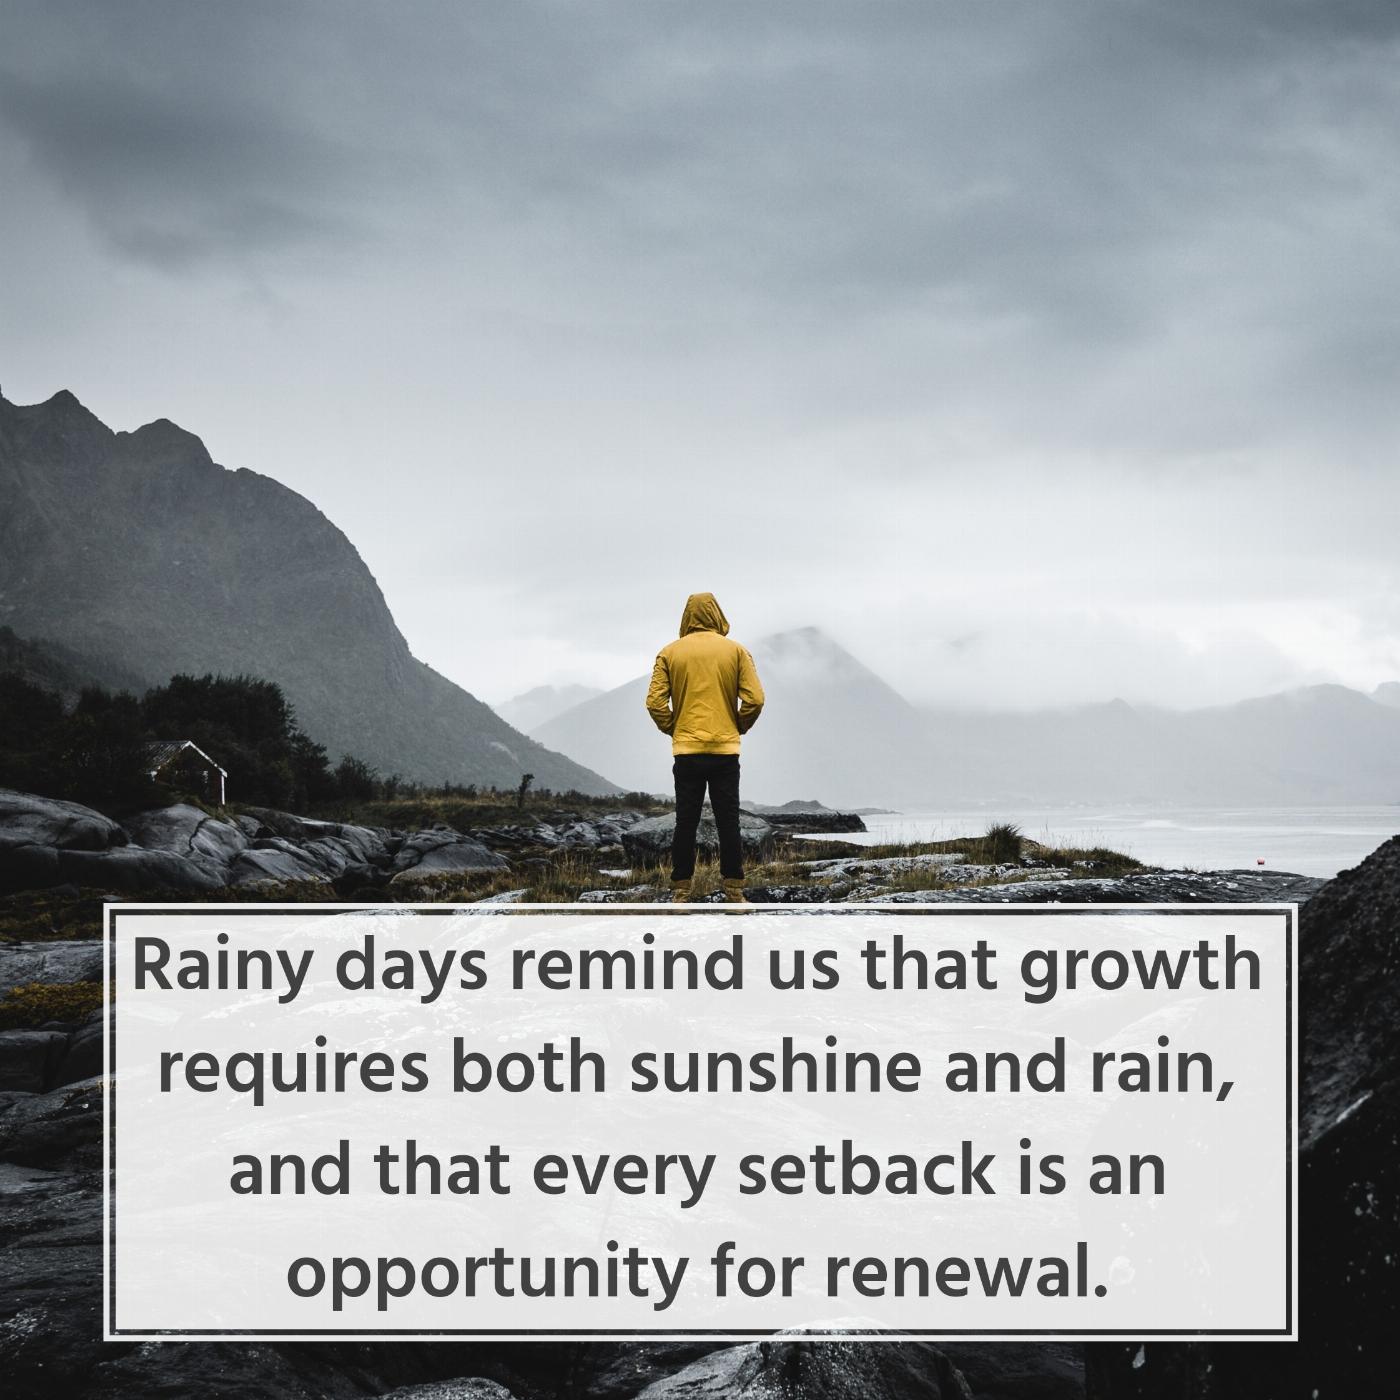 Rainy days remind us that growth requires both sunshine and rain